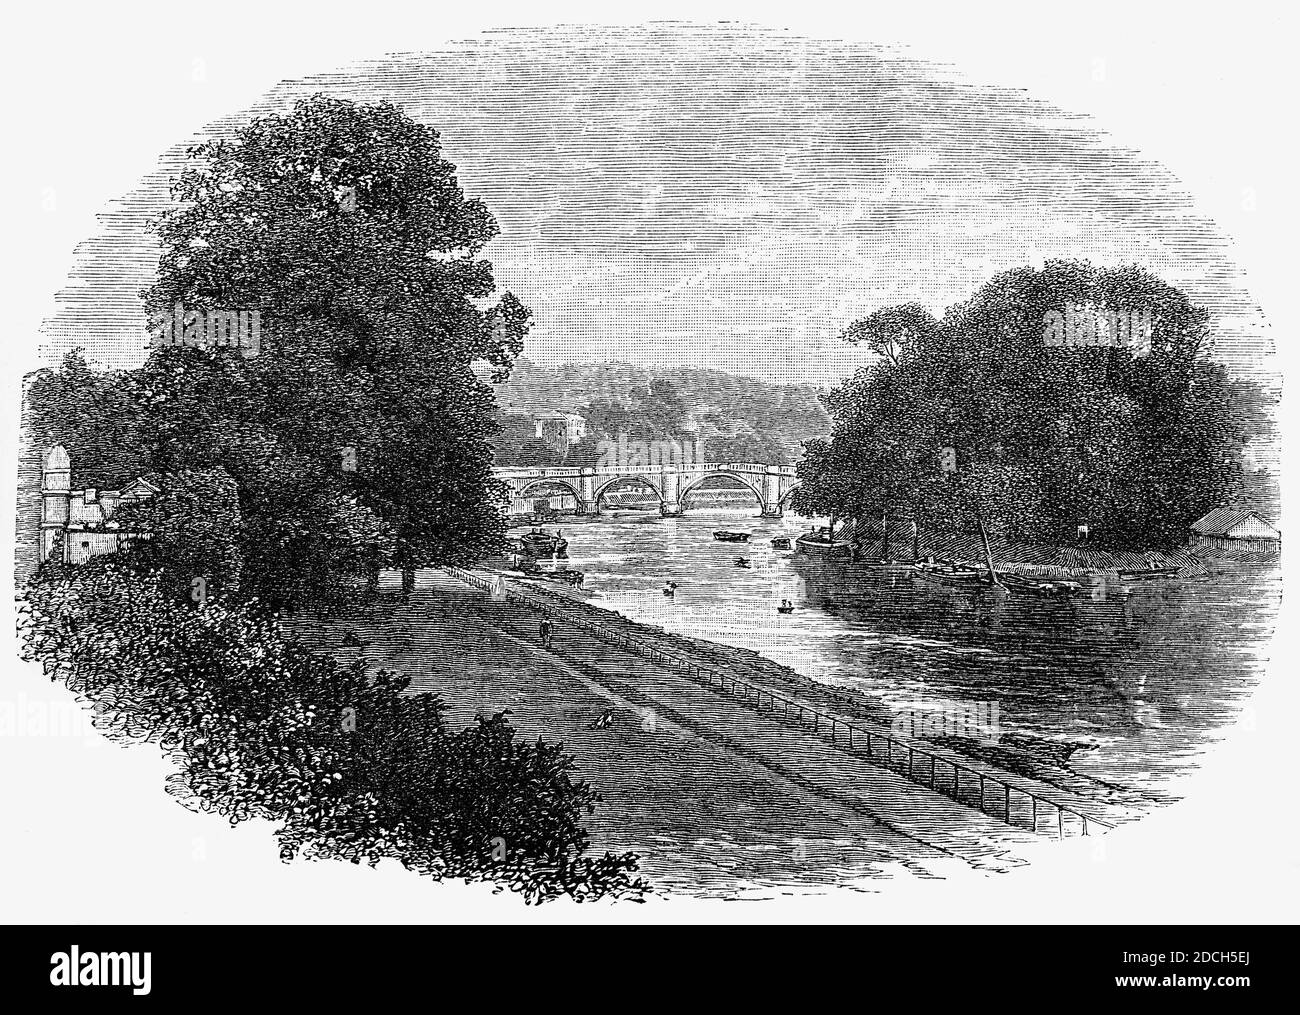 A 19th Century view of Richmond Bridge, an 18th-century stone arch bridge that crosses the River Thames at Richmond, connecting the two halves of the present-day London Borough of Richmond upon Thames. The oldest surviving Thames bridge in London it was designed by James Paine and Kenton Couse. Stock Photo